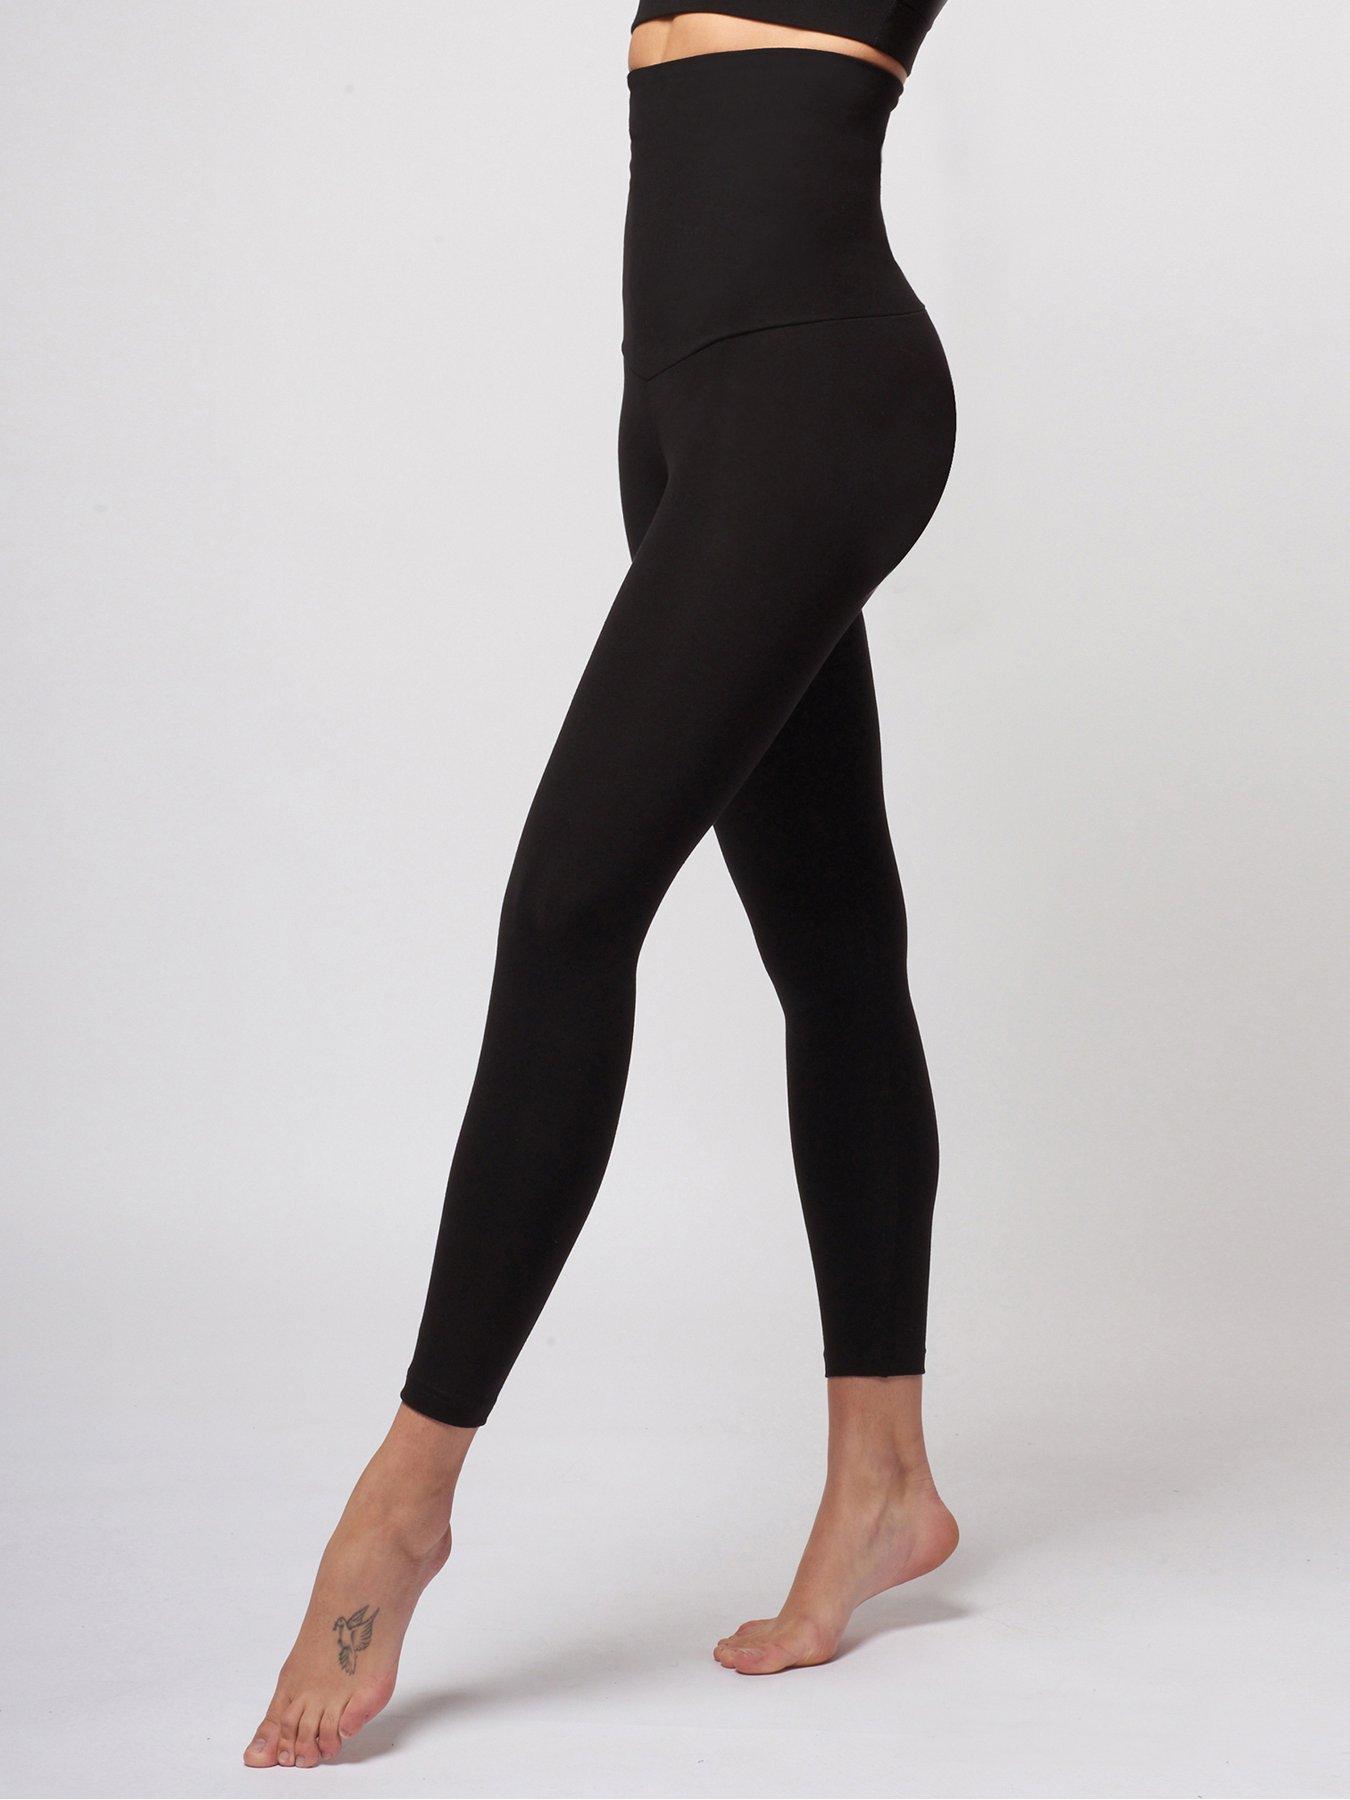 Get ready for spring with these tummy-tucking capris, down to $28: 'No  muffin top